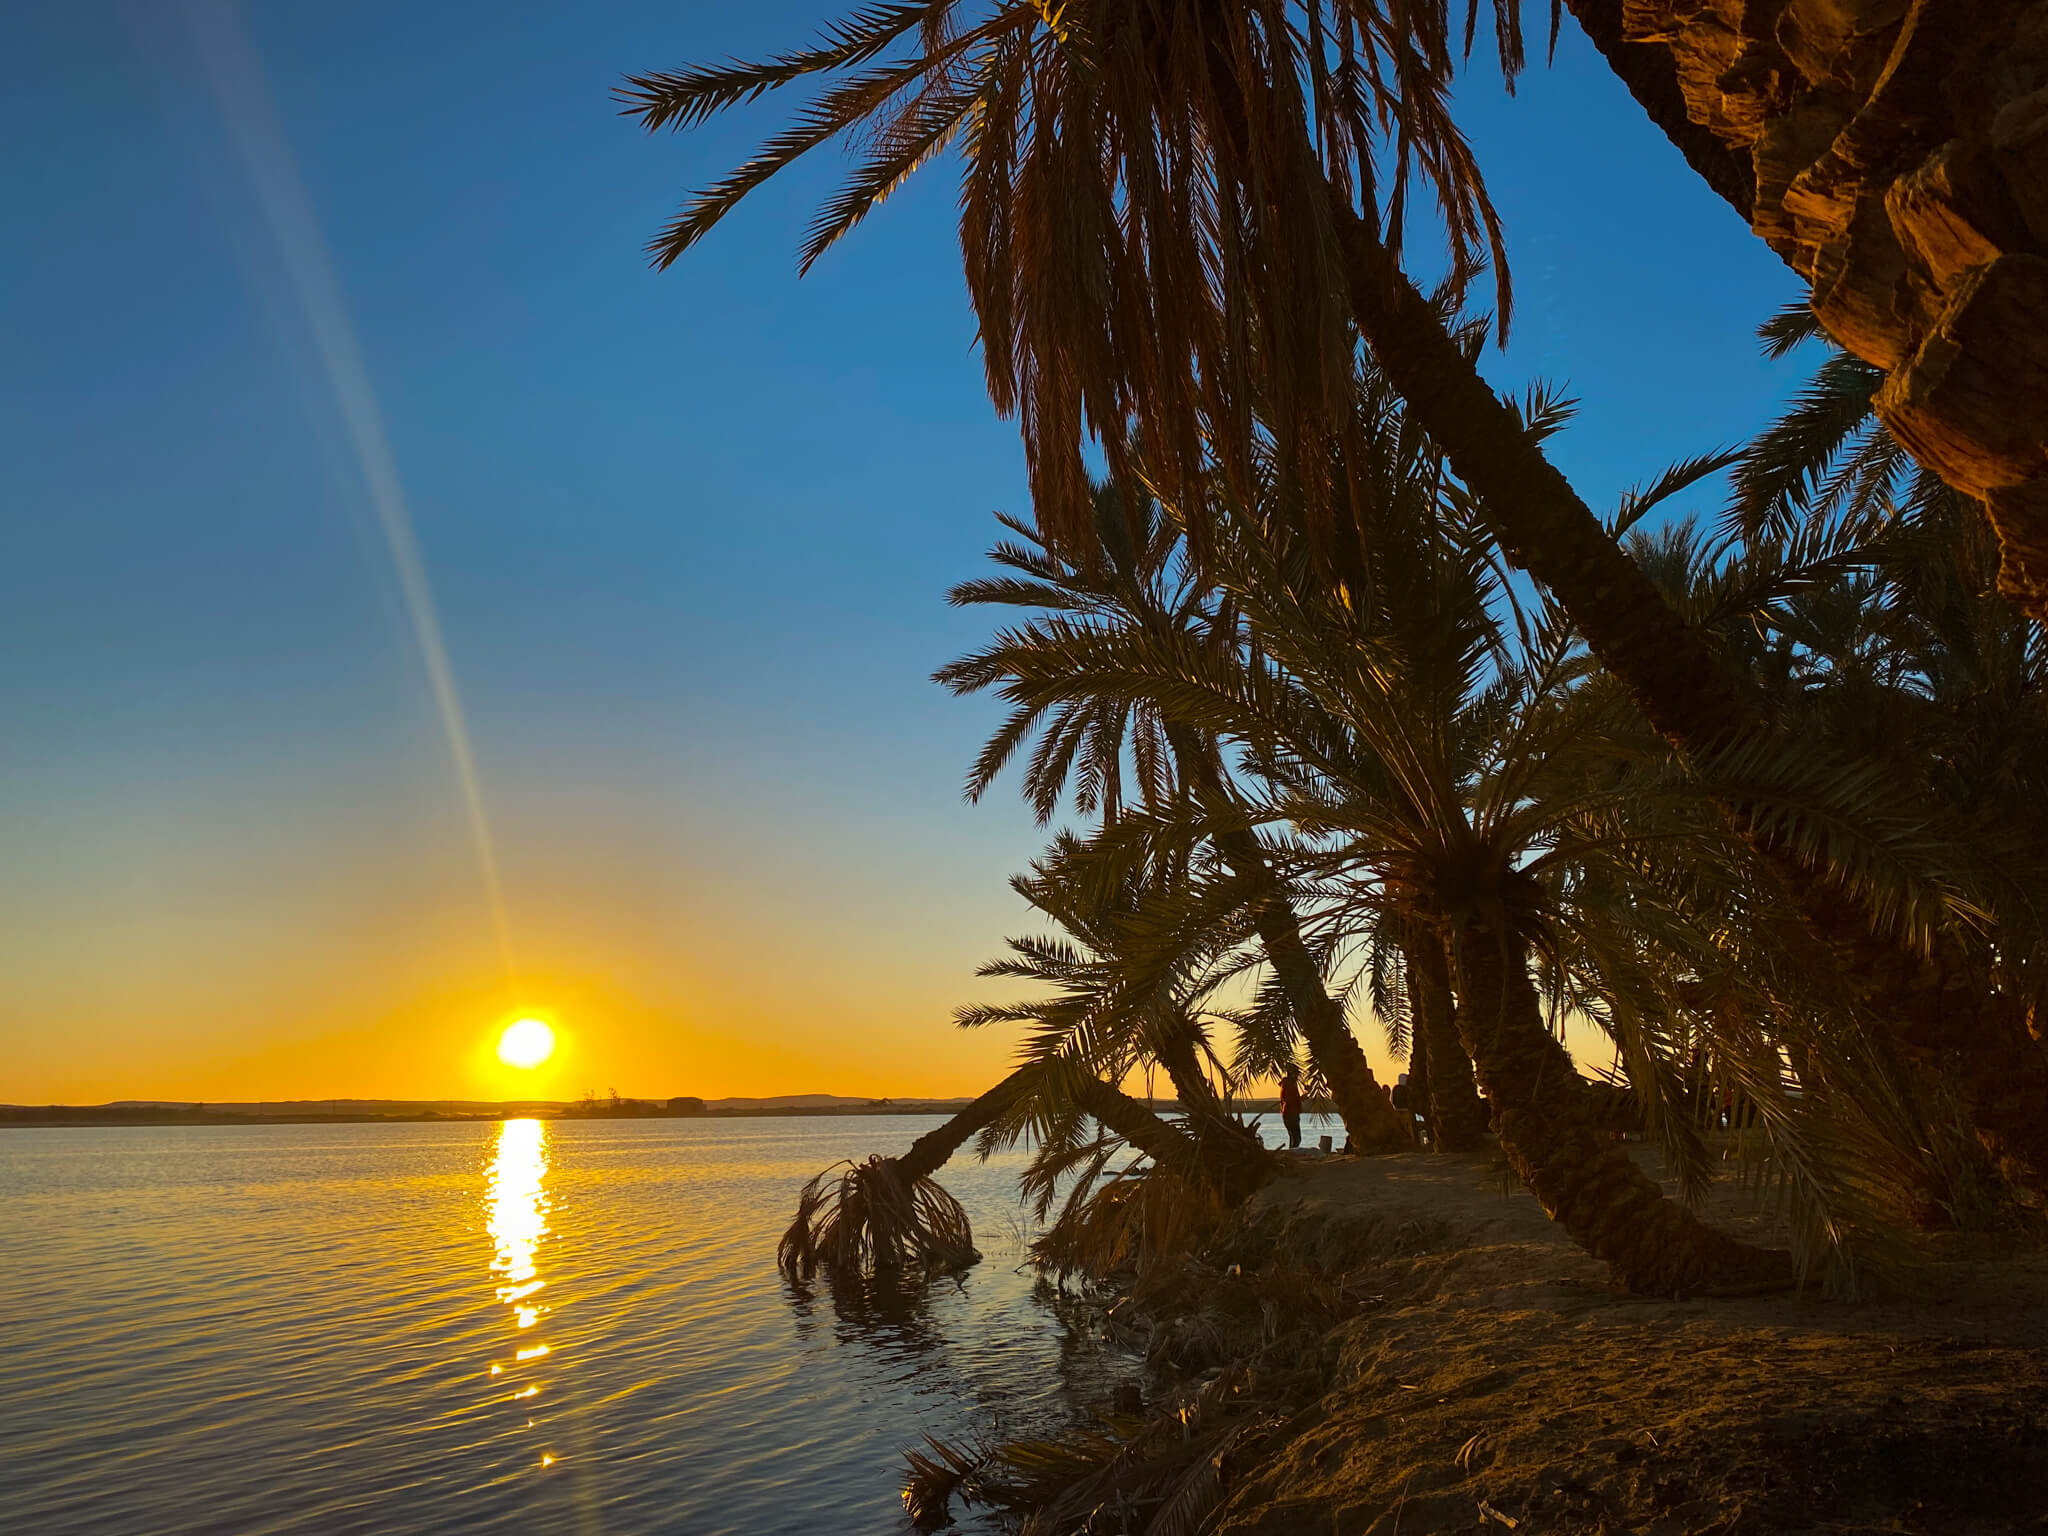 The sun setting over Siwa lake with palm trees in the foreground